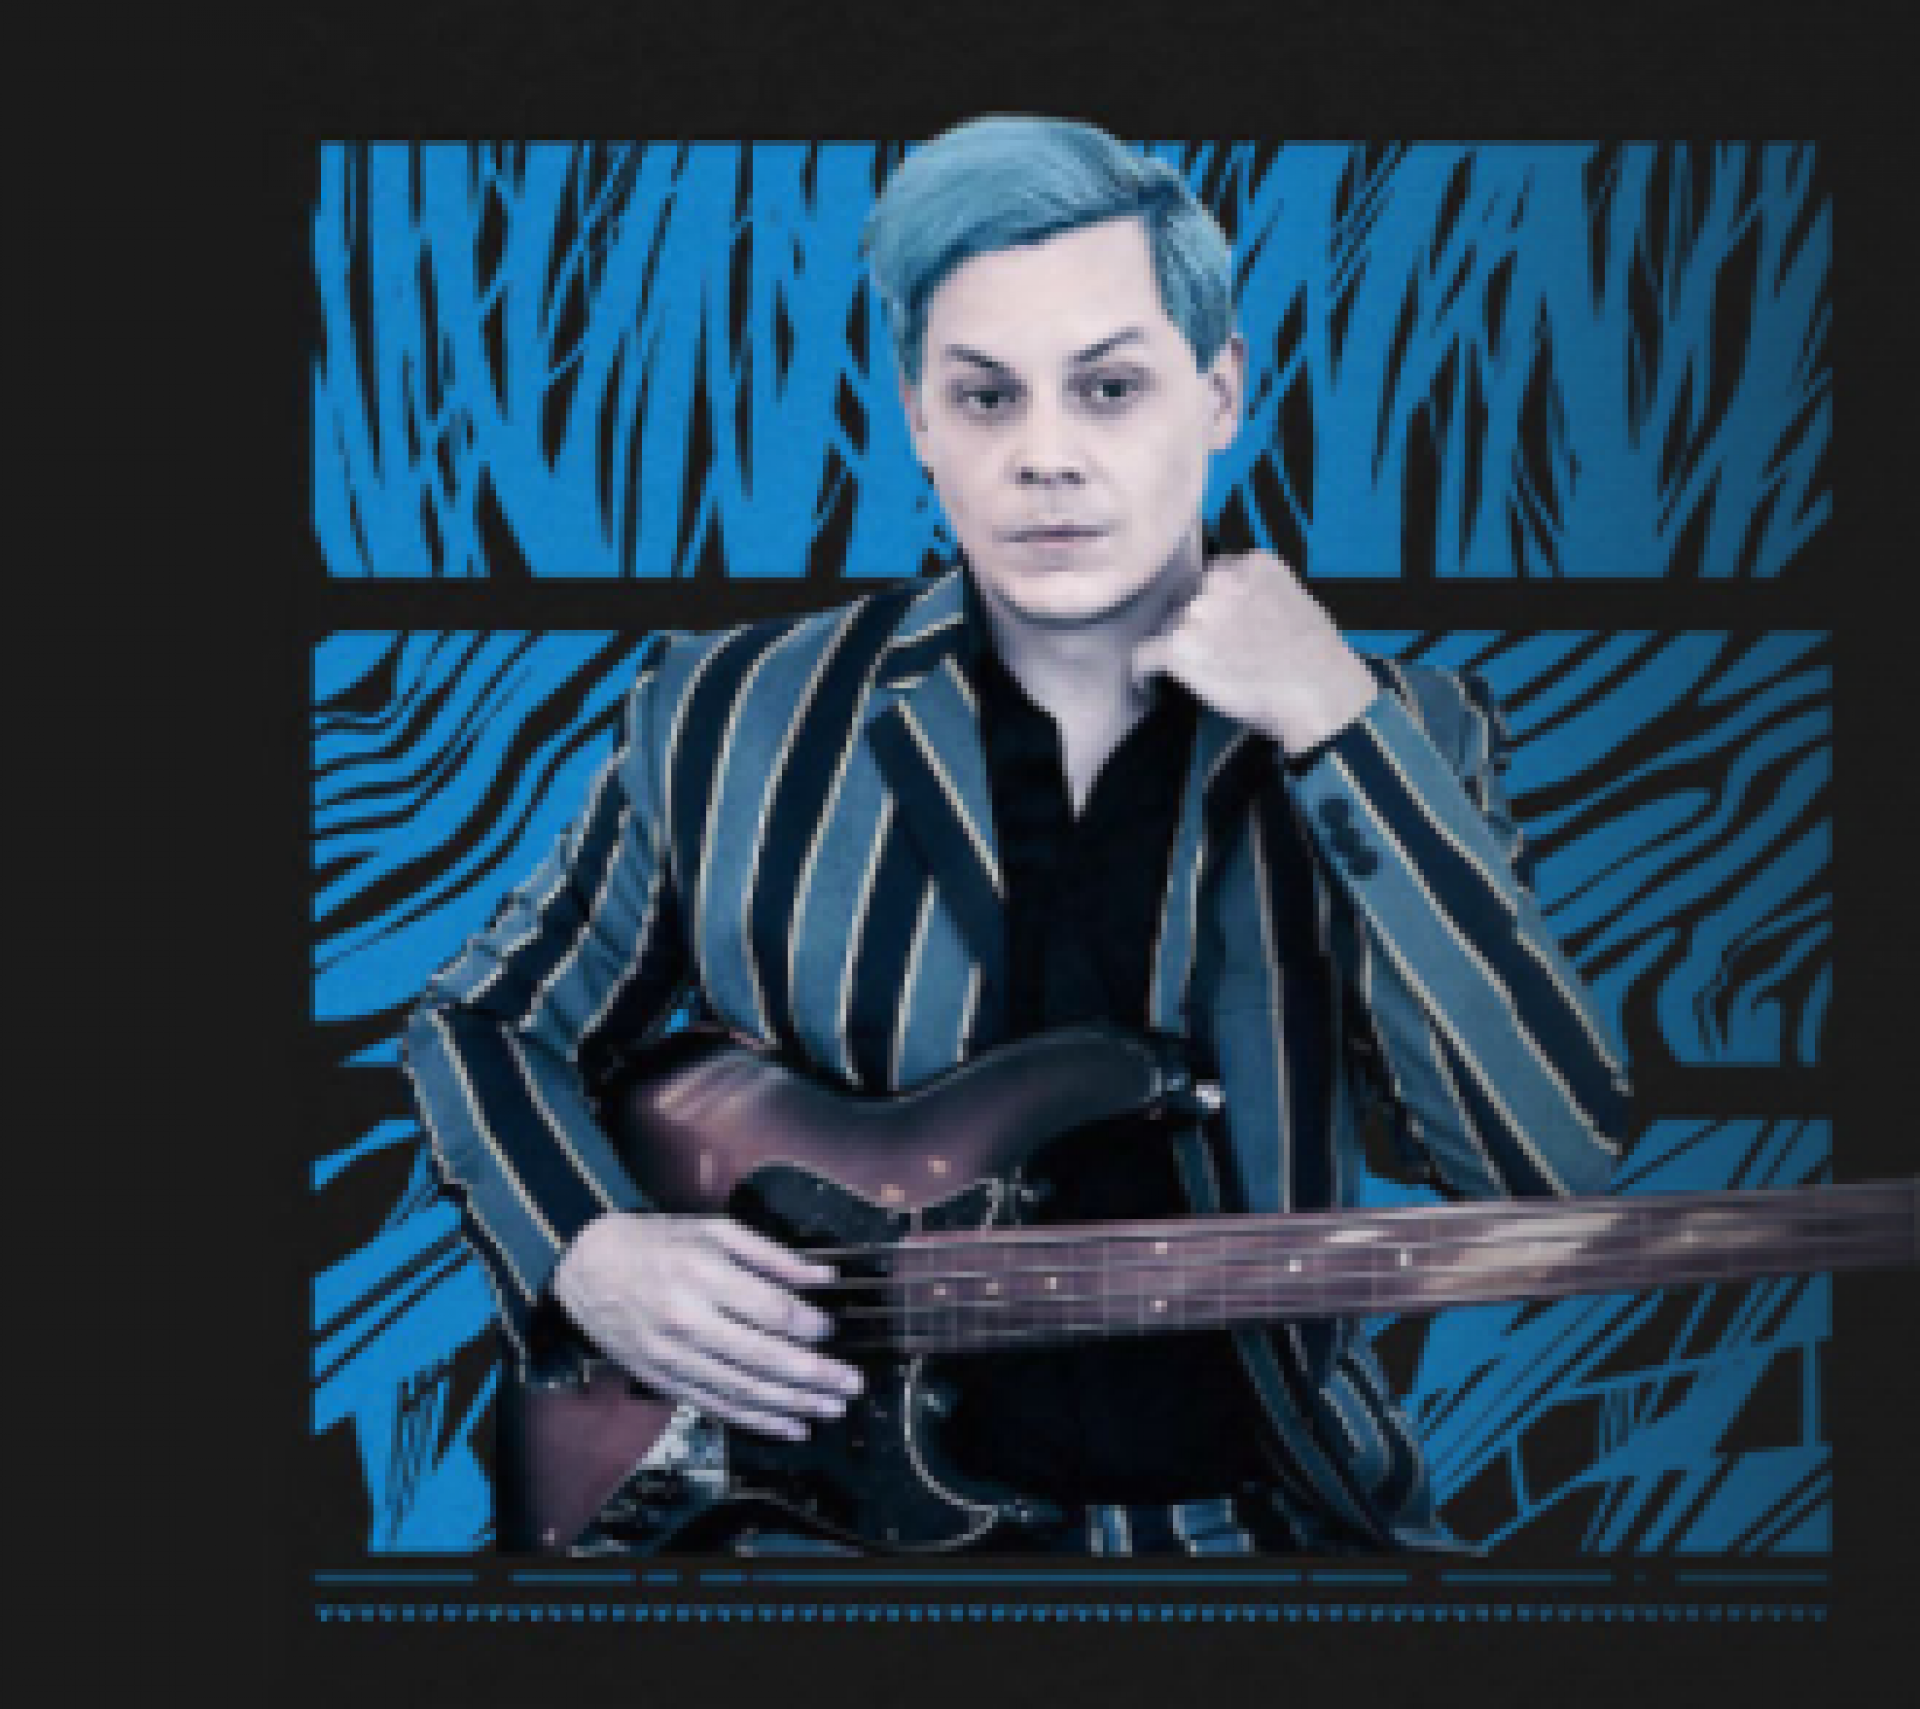 Jack White - The Supply Chain Issues Tour